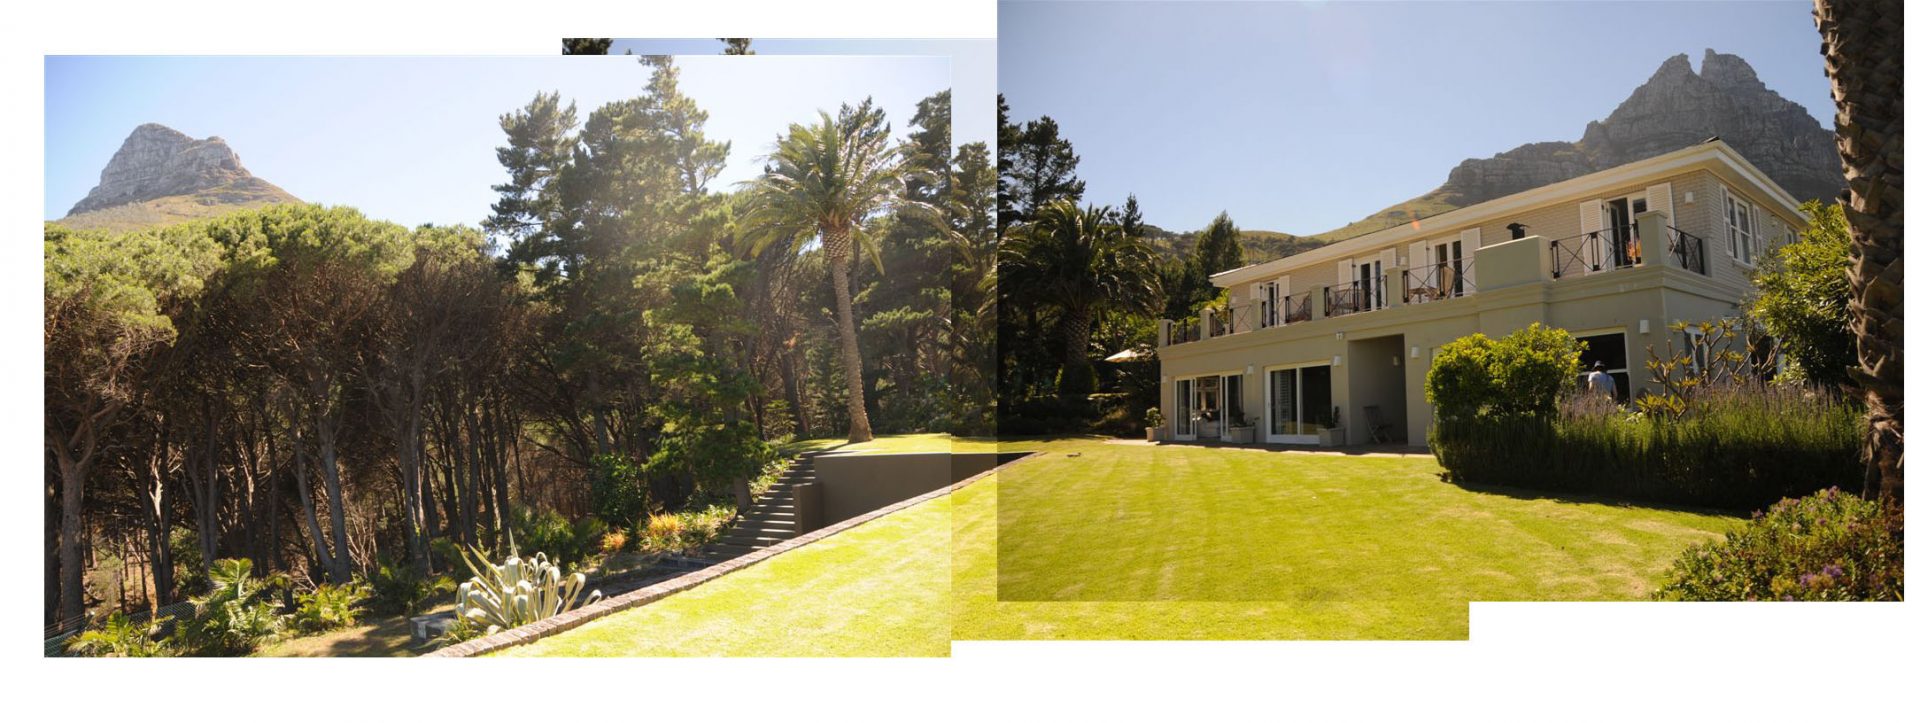 Photo 3 of Atholl Villa accommodation in Camps Bay, Cape Town with 5 bedrooms and 4 bathrooms